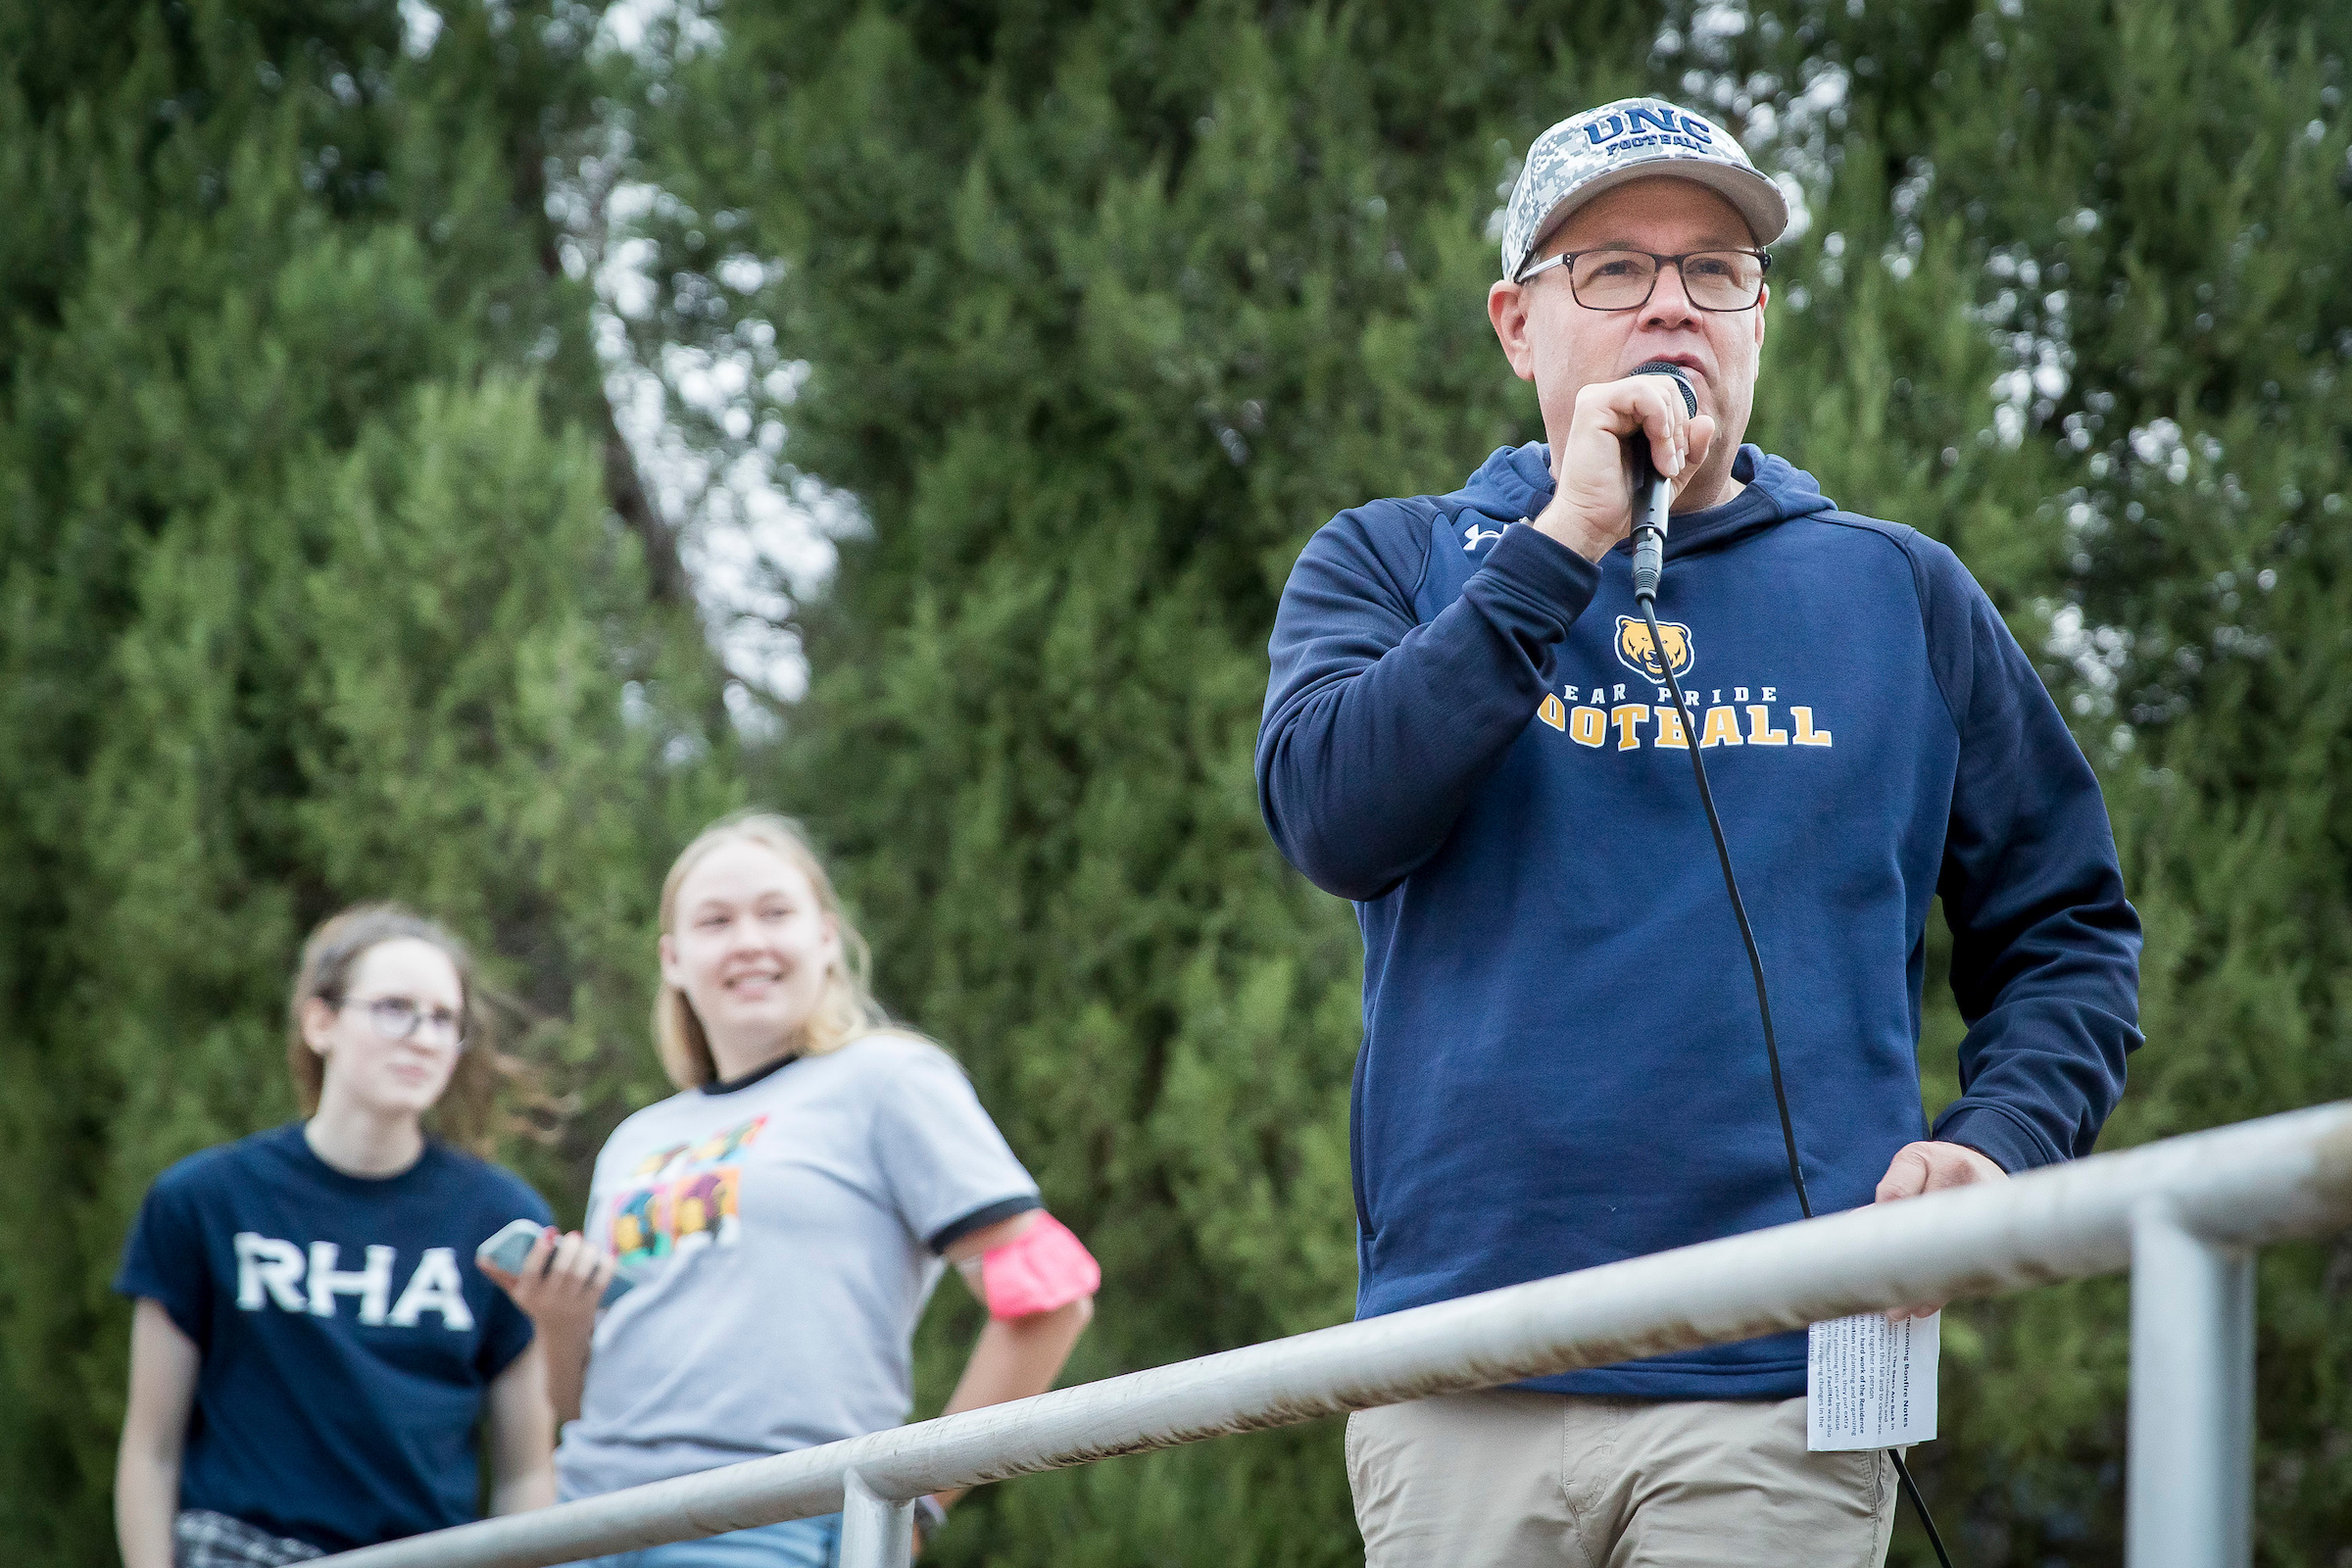 President Andy Feinstein welcomes the campus community during the annual Homecoming pep rally and bonfire